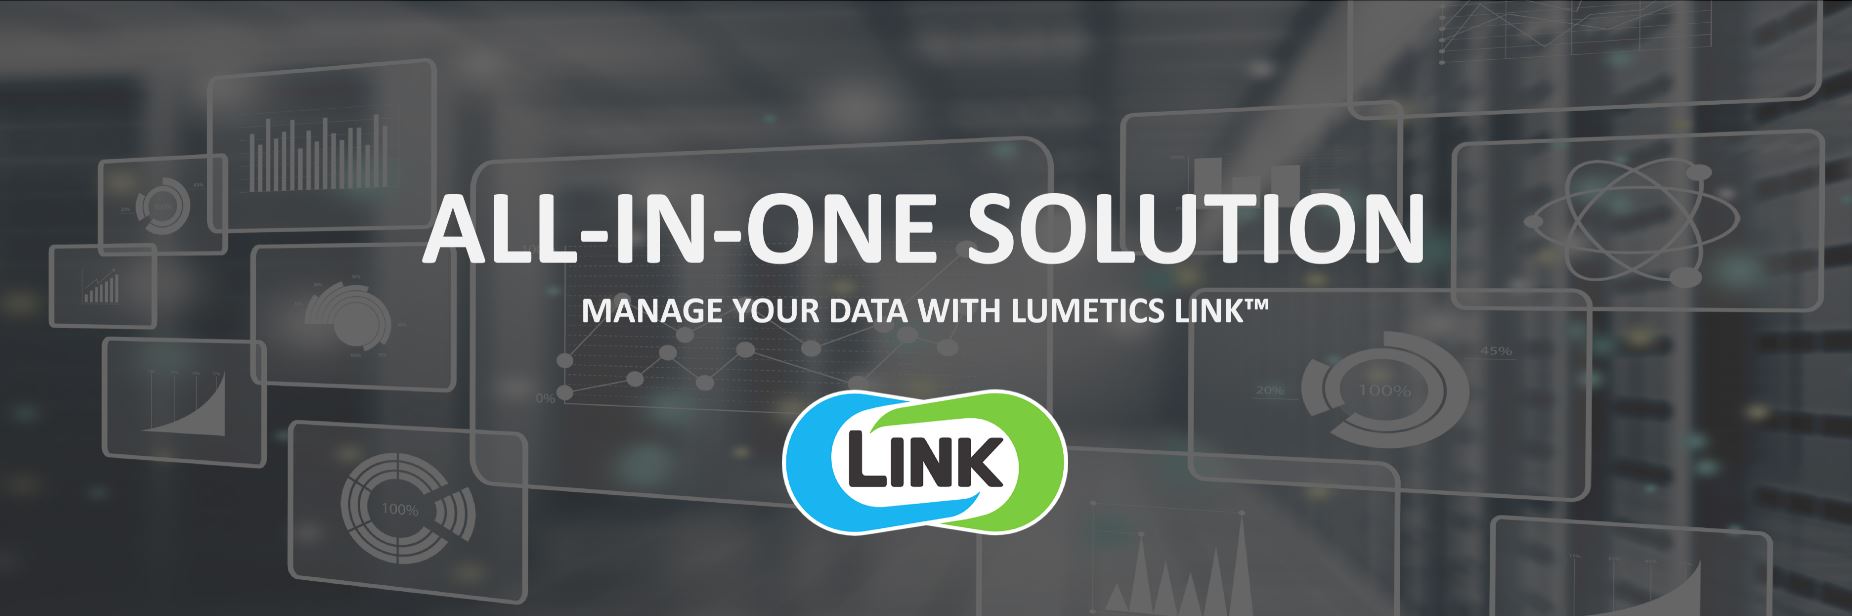 Homepage Hero - LINK all in one solution